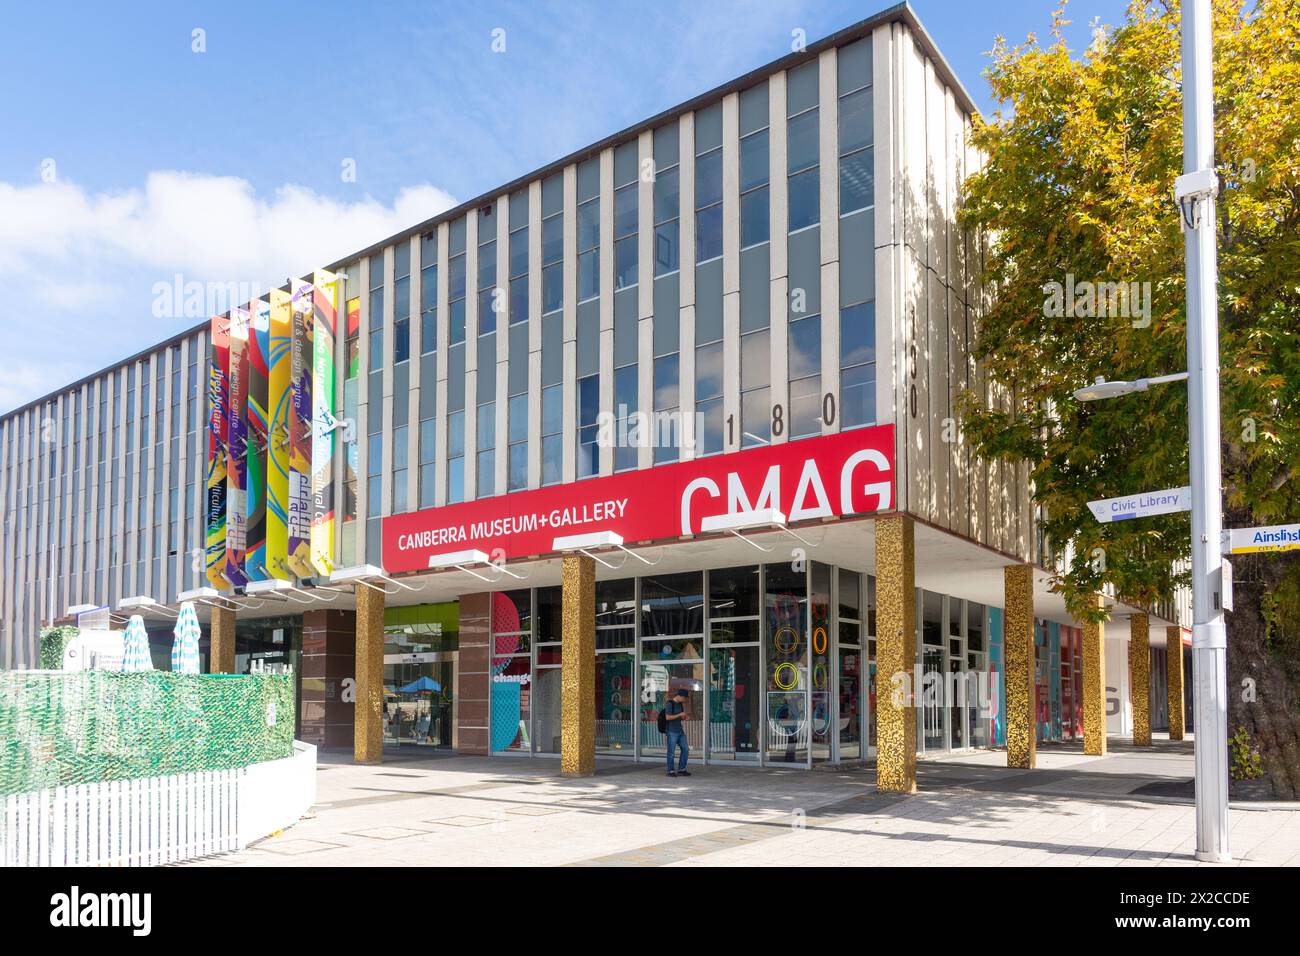 Canberra Museum + Galerie, Civic Square, Central Canberra, Canberra, Australian Capital Territory, Australien Stockfoto